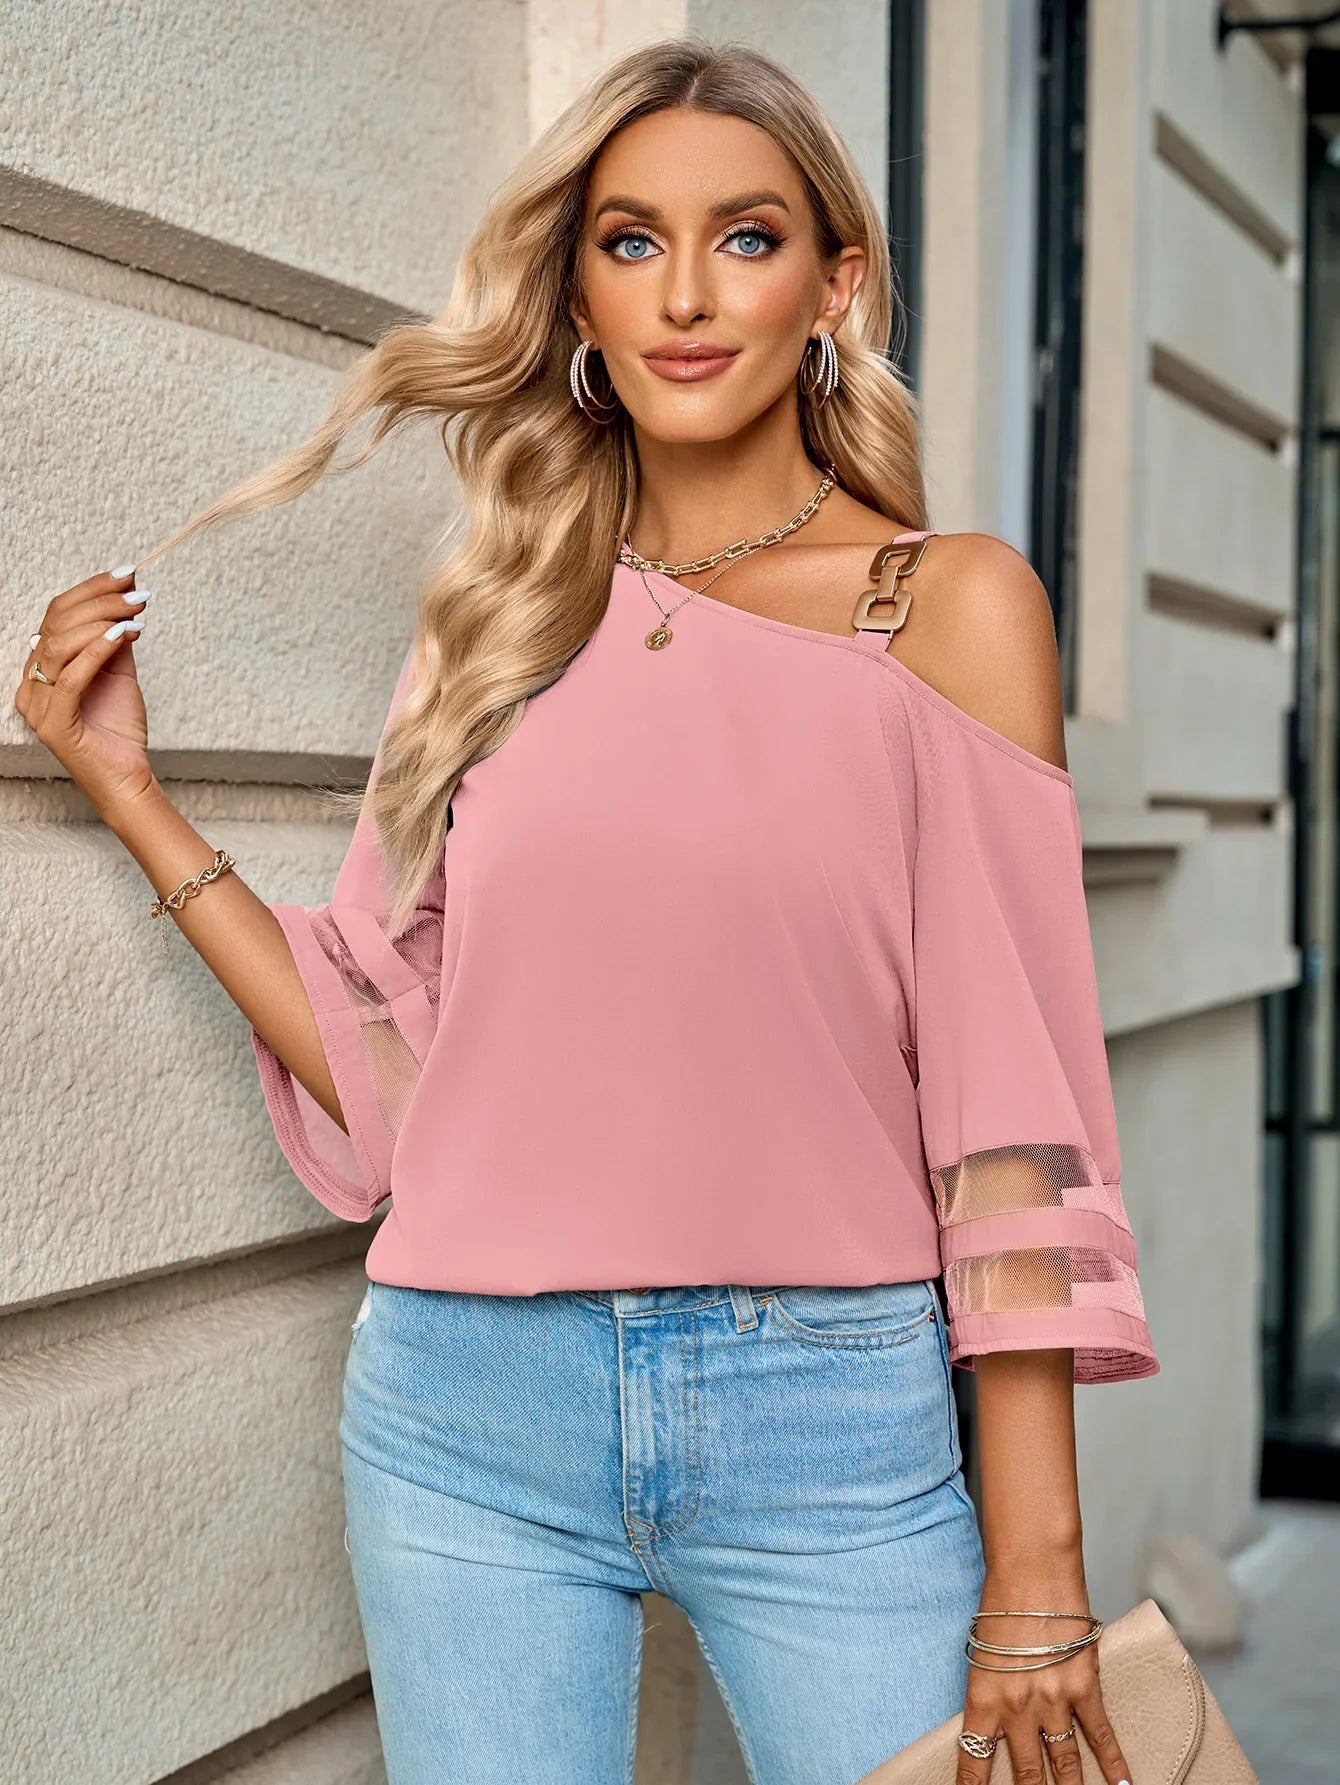 Women Spring Summer New Women's Clothing Fashion Casual Solid Color Skew Collar Metal Buckle Top Shirts